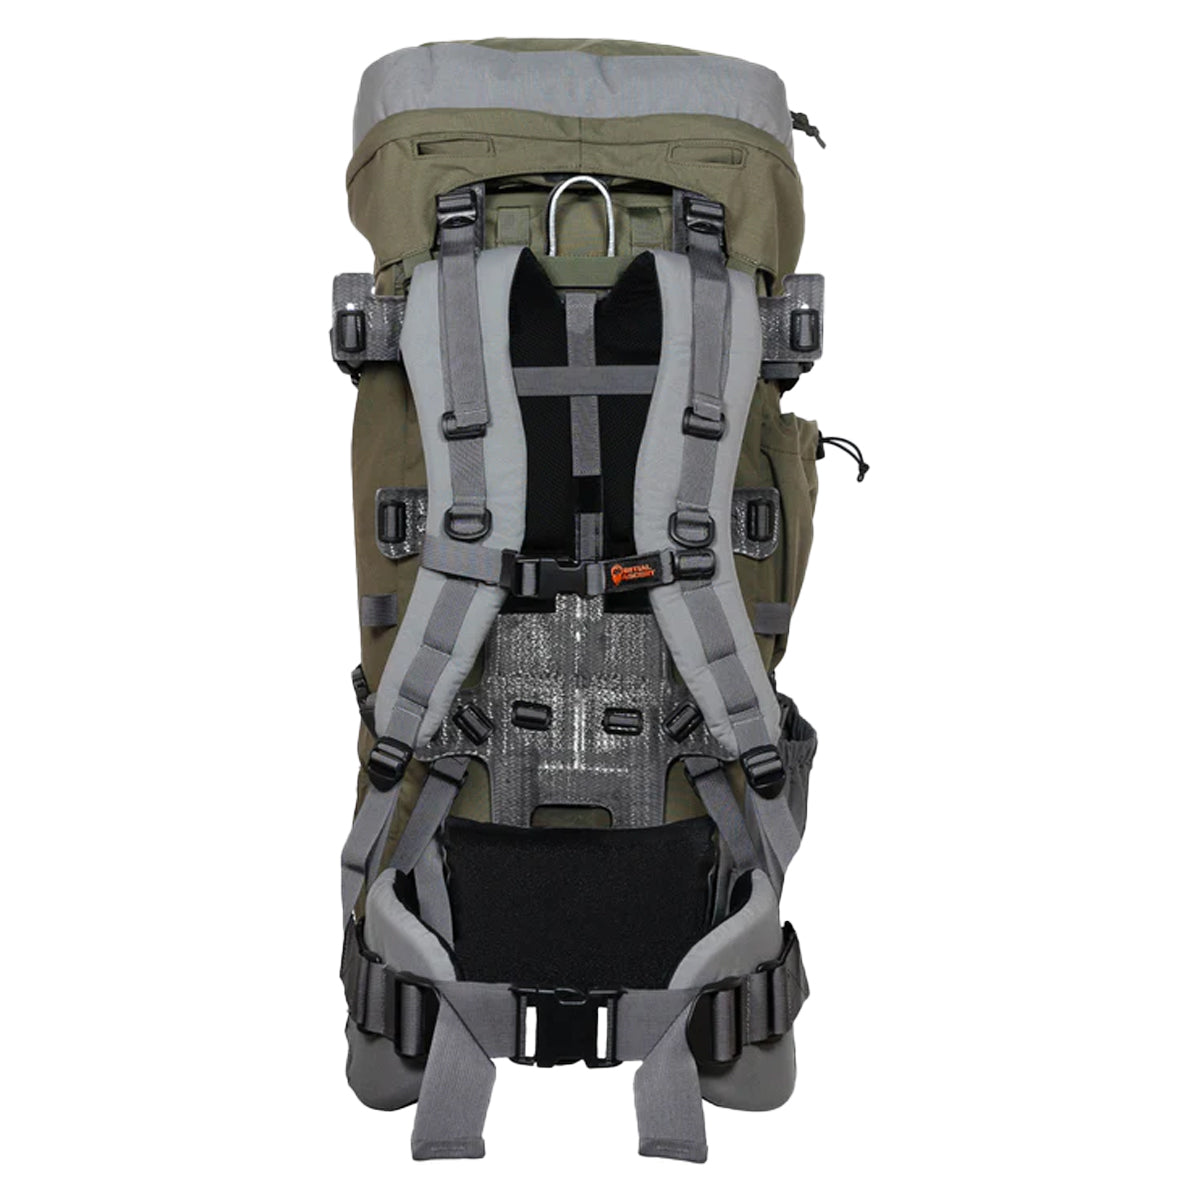 Initial Ascent 3K Backpack